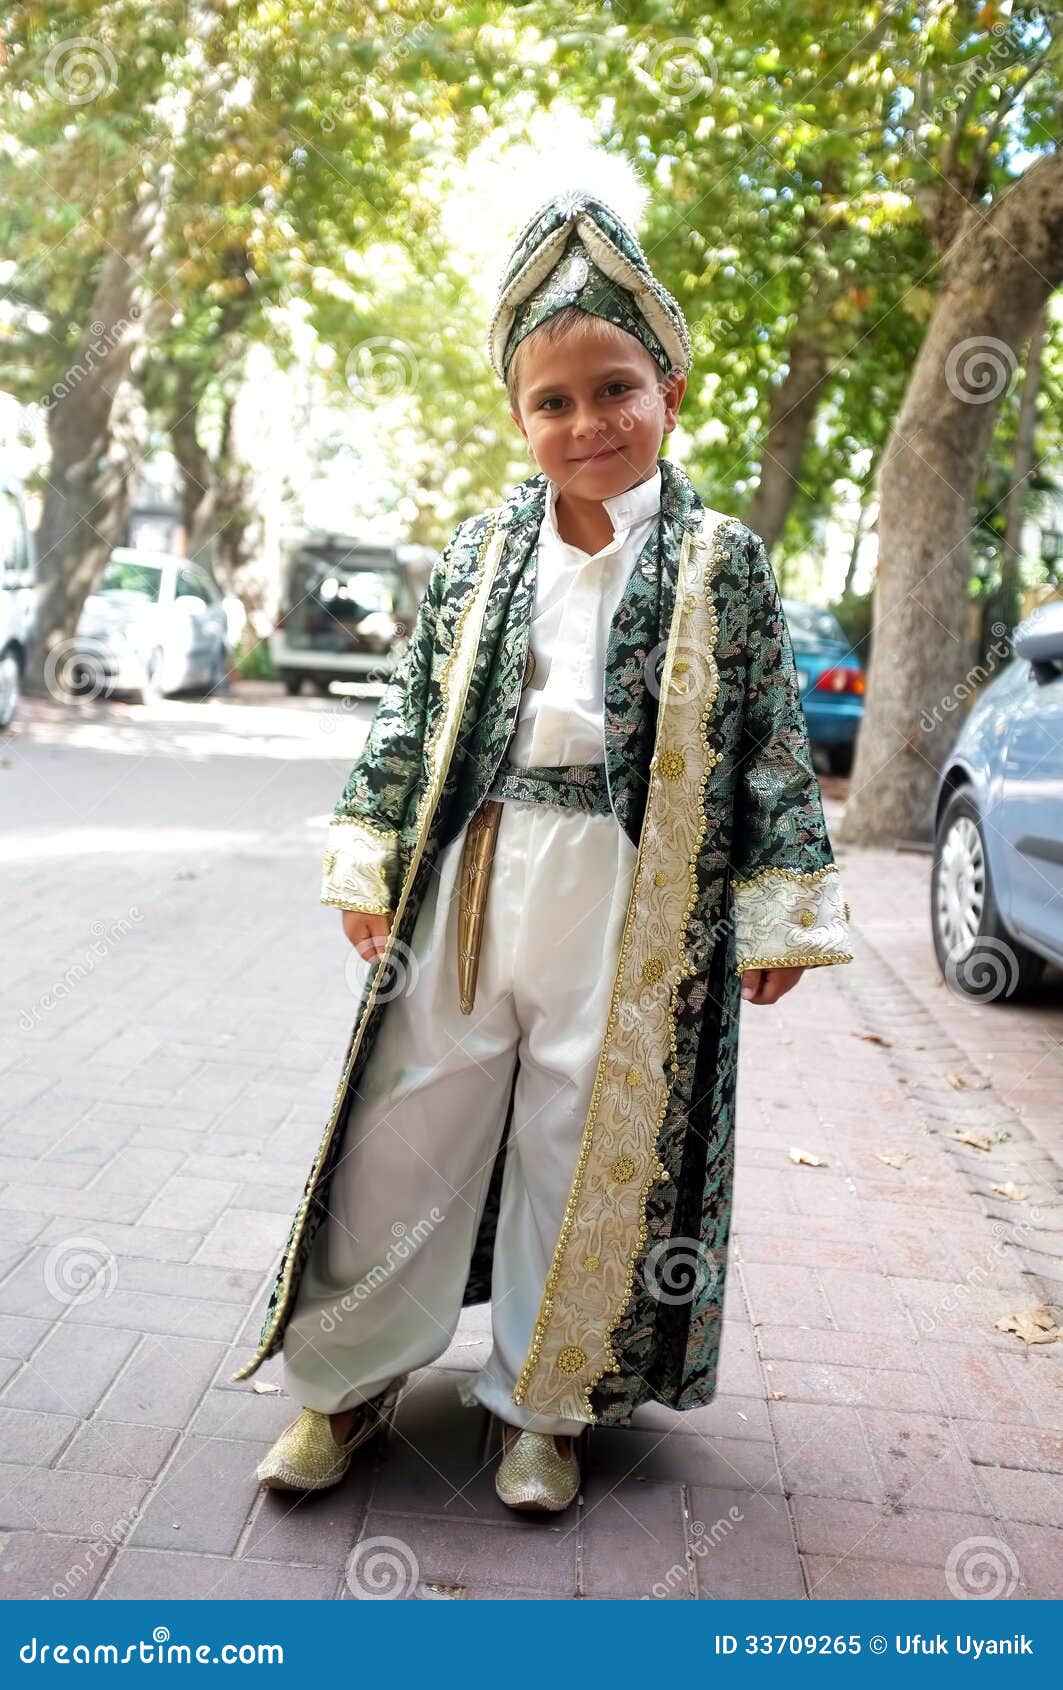 Boy in circumcision dress editorial image. Image of outfit - 33709265